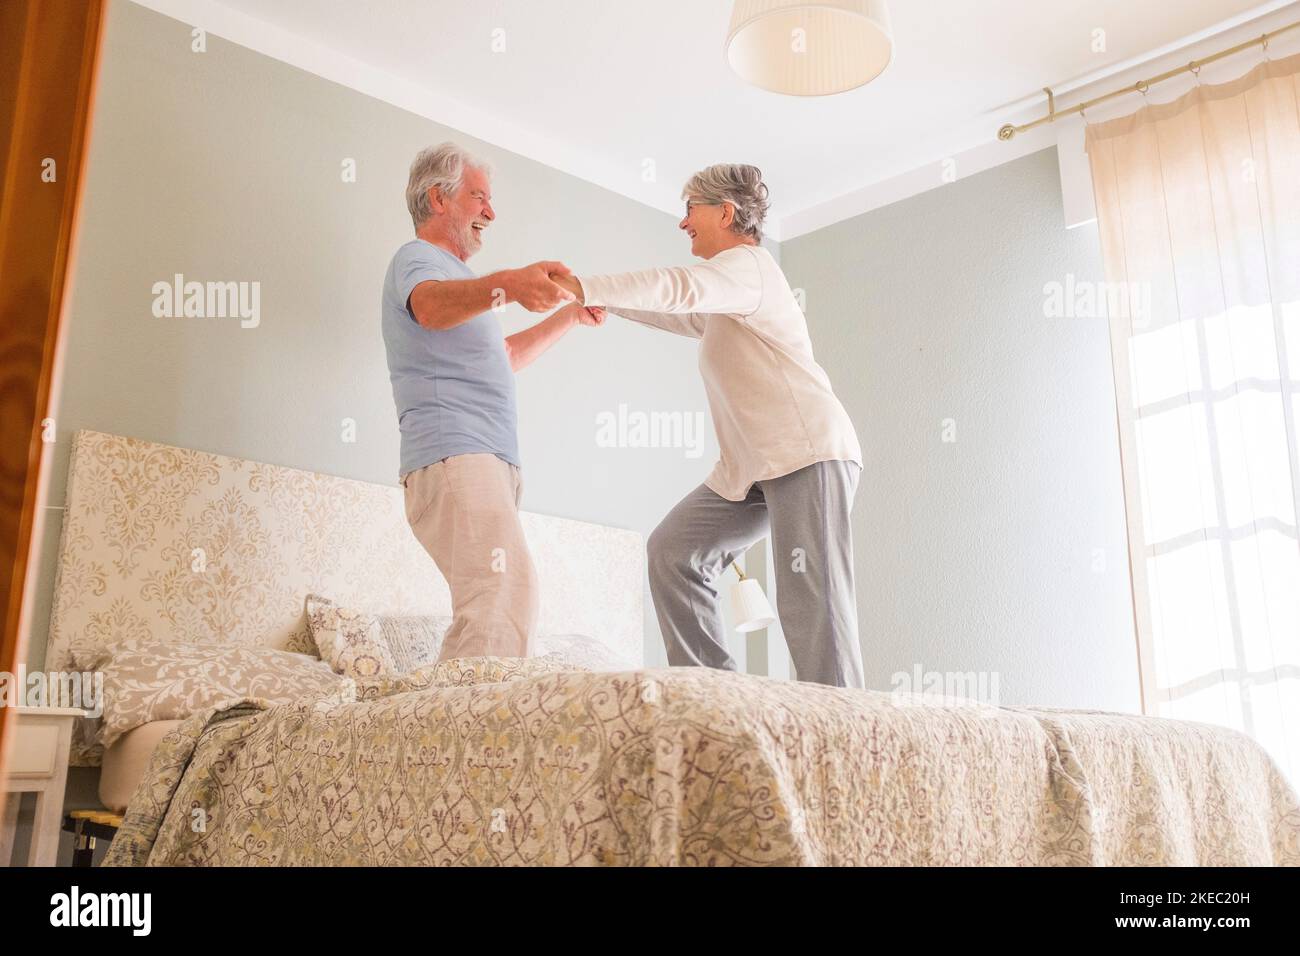 Elderly happy senior couple holding hands and dancing together on bed at home. Carefree active senior heterosexual couple holding hands and dancing together on bed at home Stock Photo